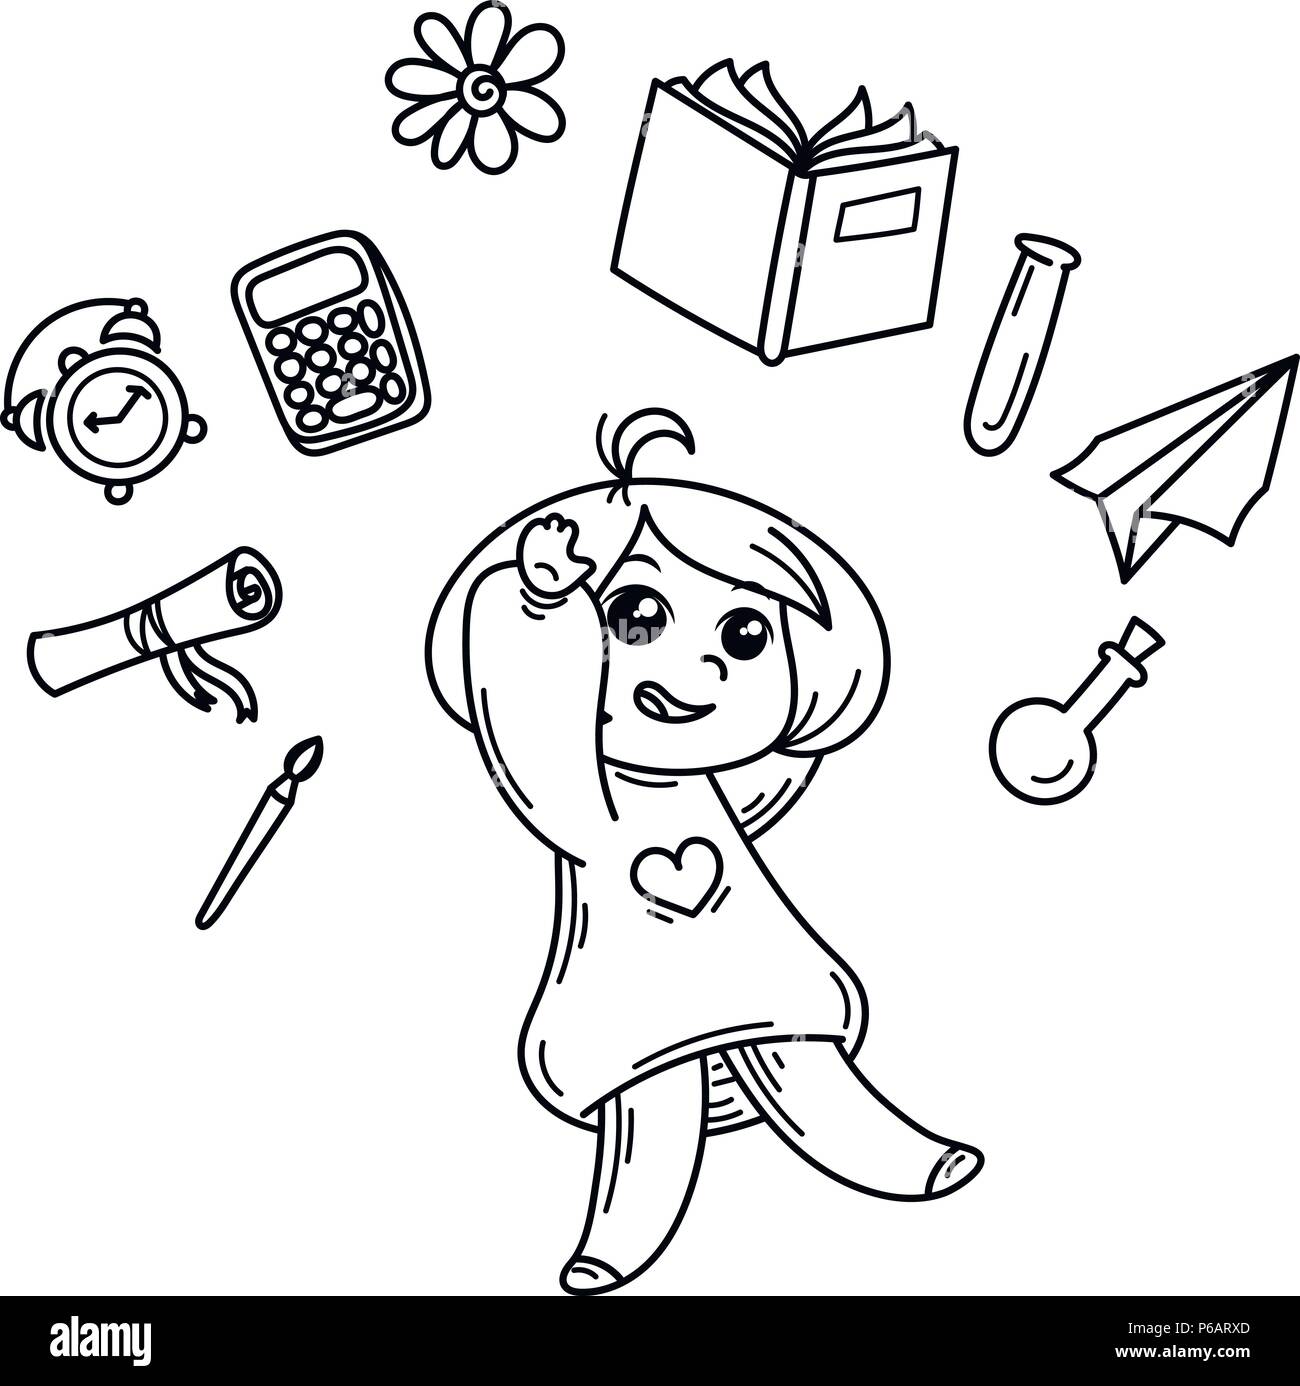 https://c8.alamy.com/comp/P6ARXD/cute-girl-ready-to-school-vector-illustration-for-books-prints-posters-cards-coloring-page-P6ARXD.jpg